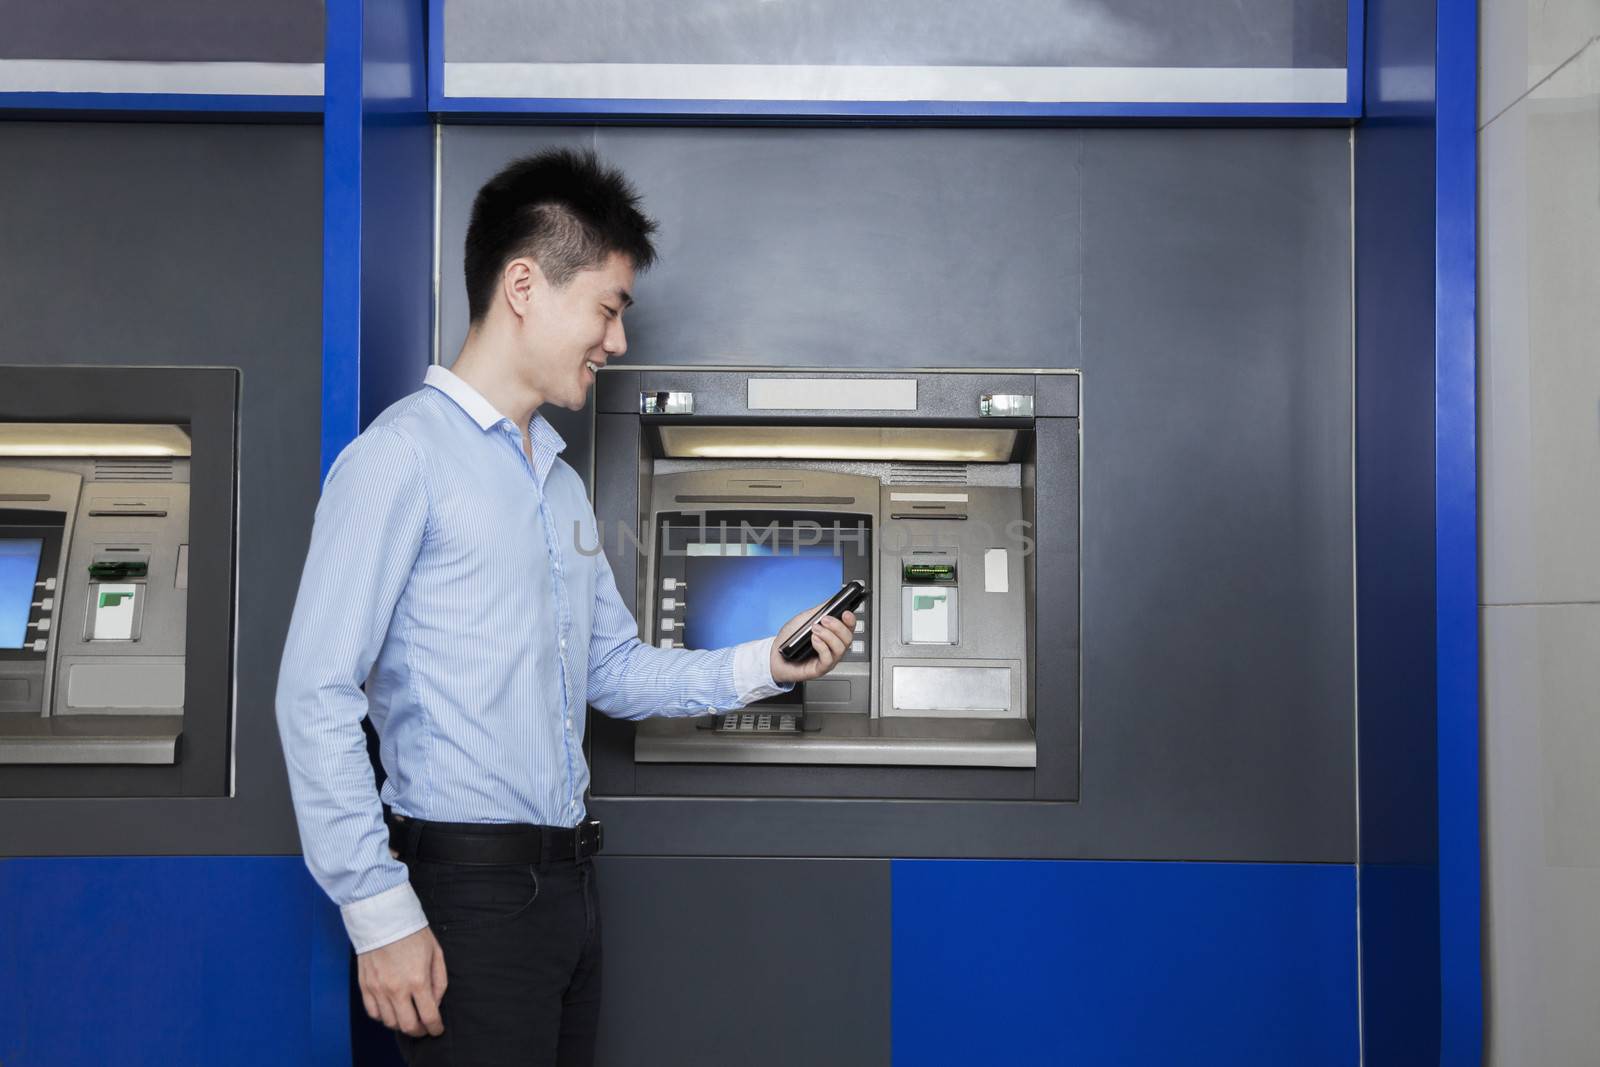 Smiling young businessman standing in front of an ATM and looking at his phone by XiXinXing